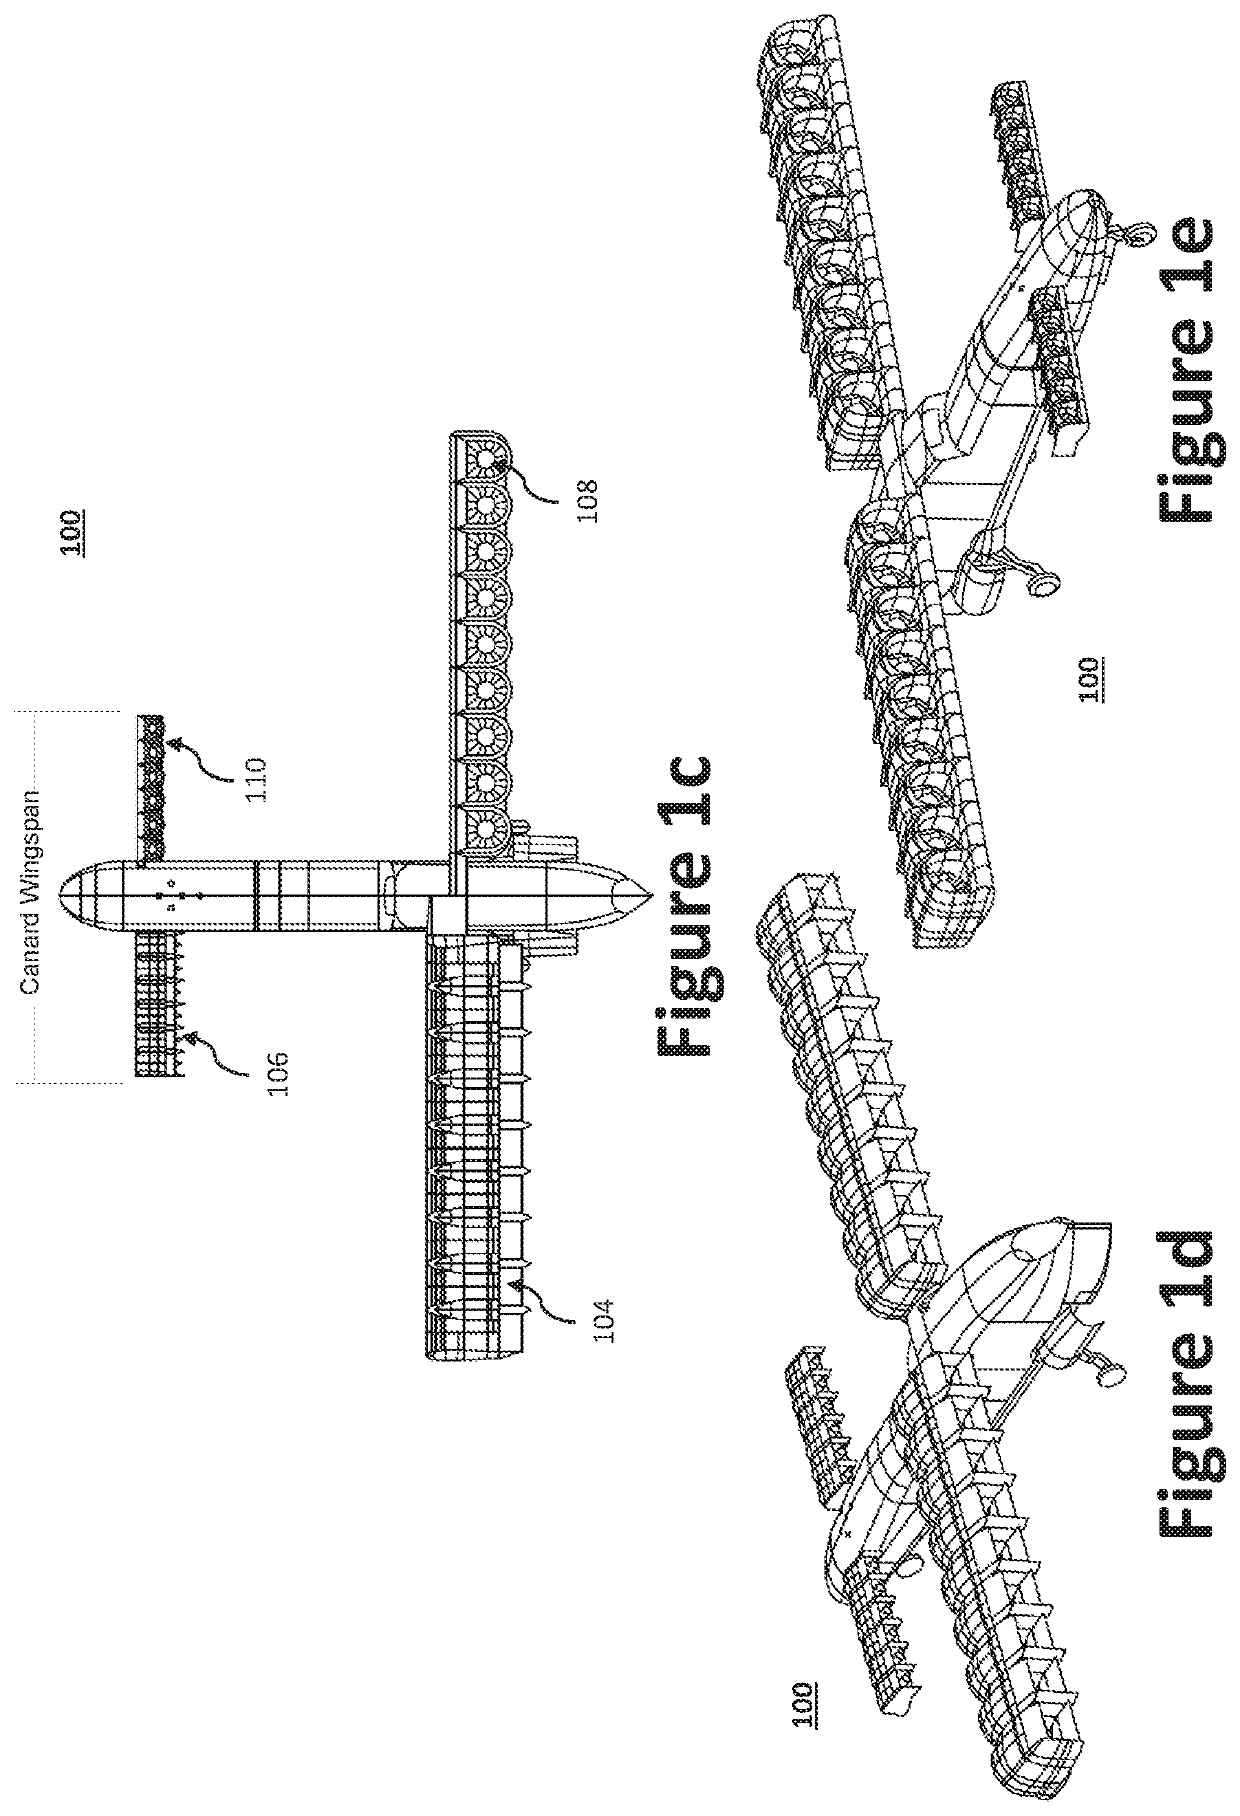 Hybrid propulsion vertical take-off and landing aircraft